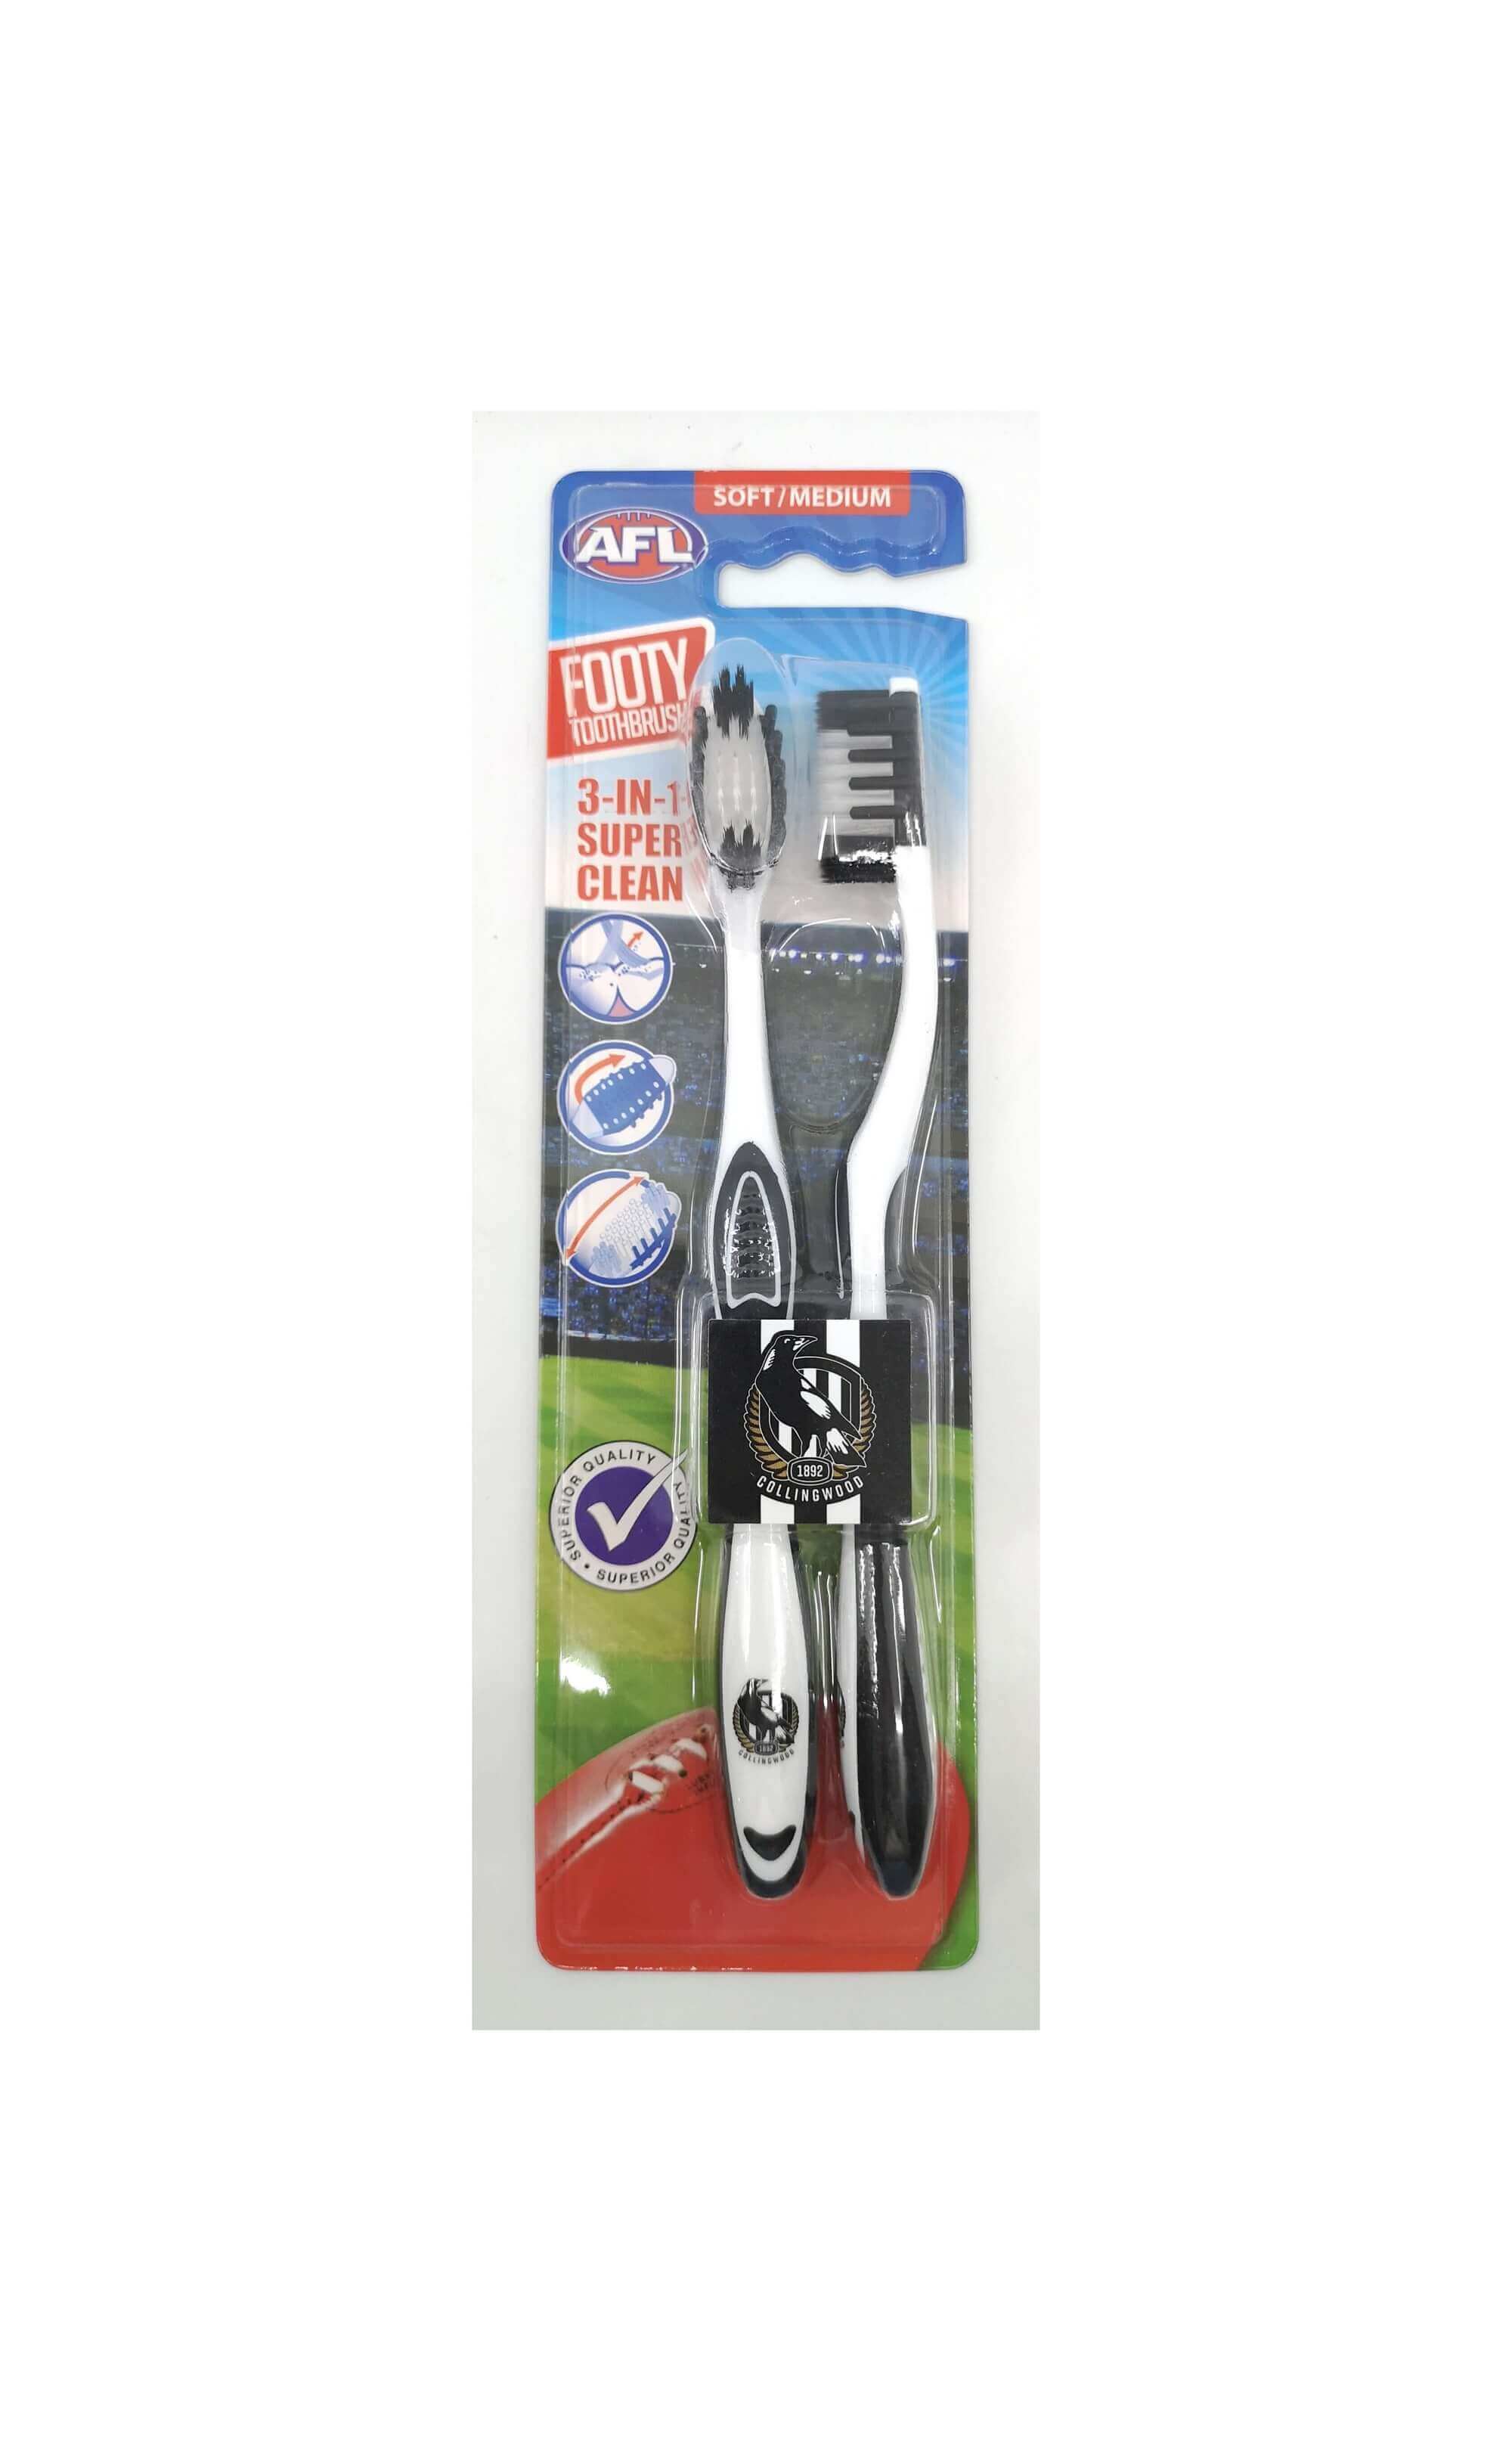 COLLINGWOOD MAGPIES AFL TOOTHBRUSH 2 PACK_COLLINGWOOD MAGPIES_STUBBY CLUB